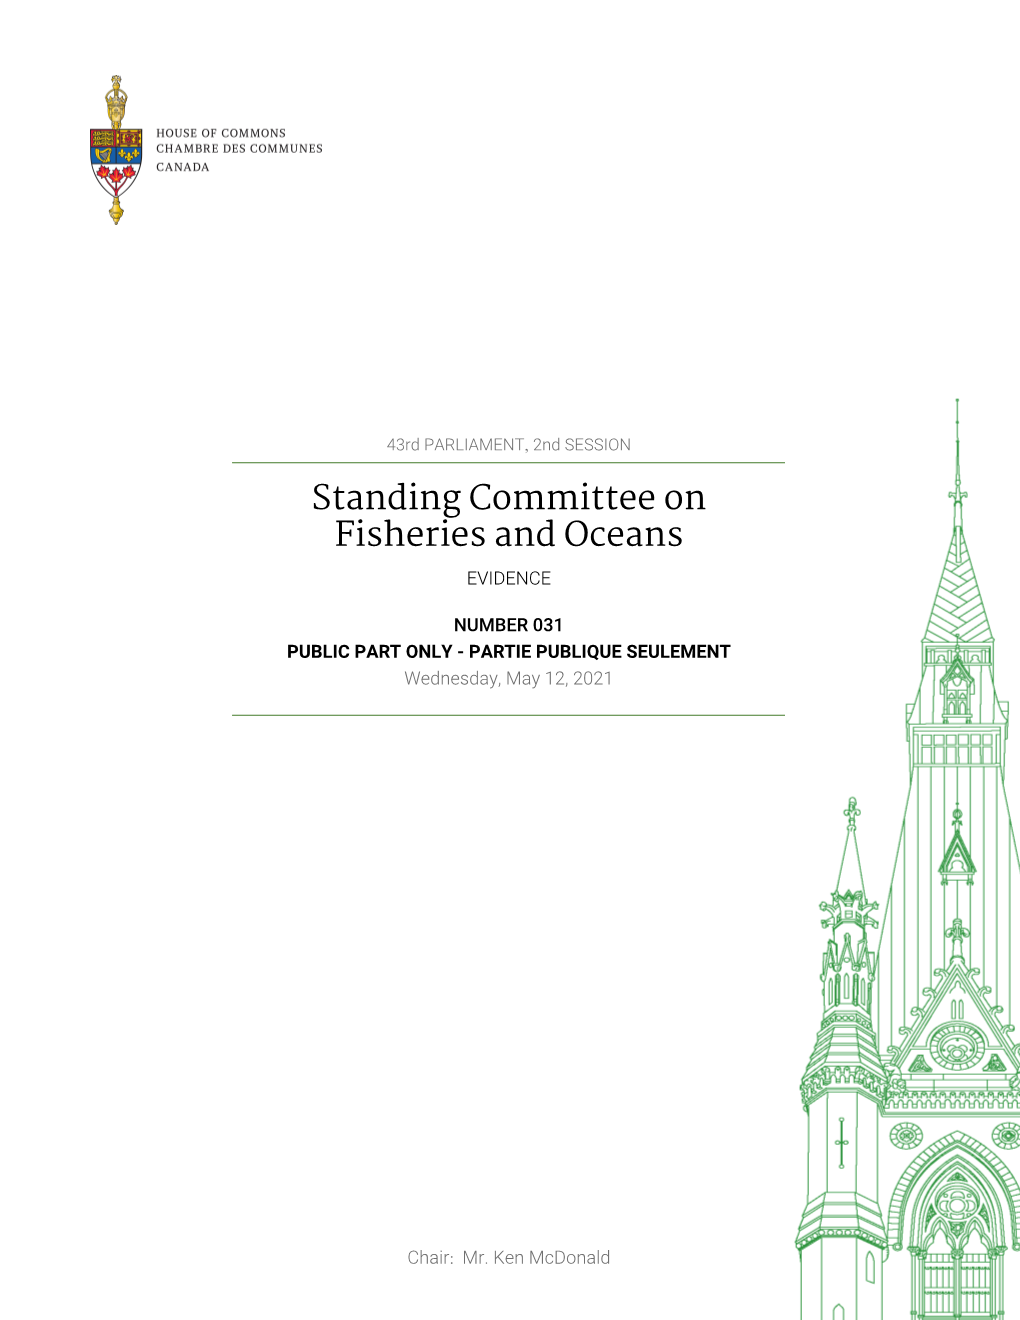 Evidence of the Standing Committee on Fisheries